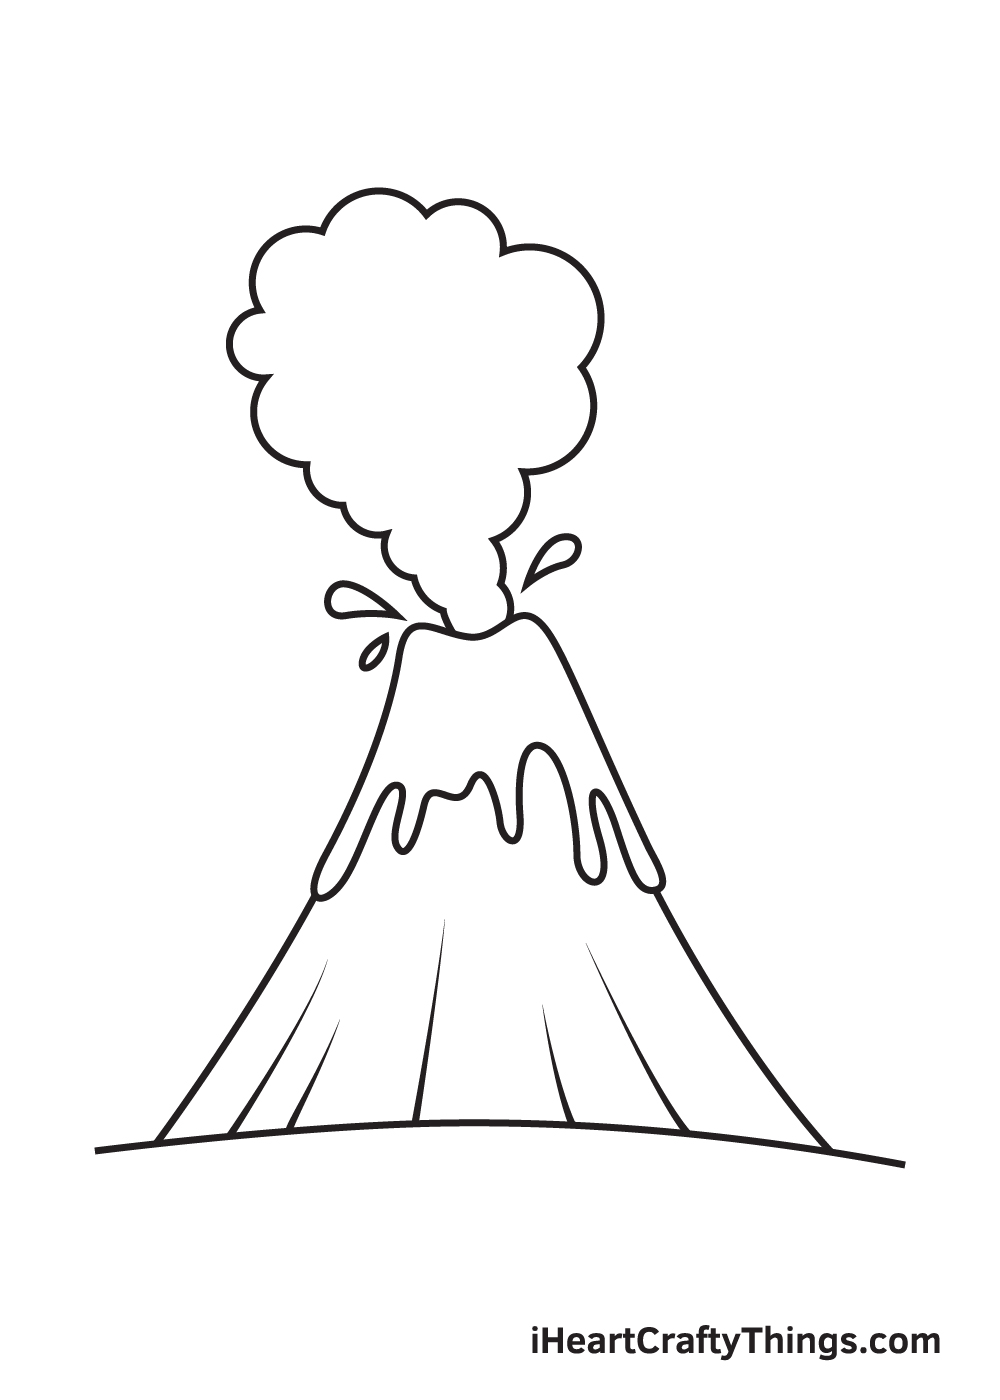 Volcano Drawing - How To Draw A Volcano Step By Step